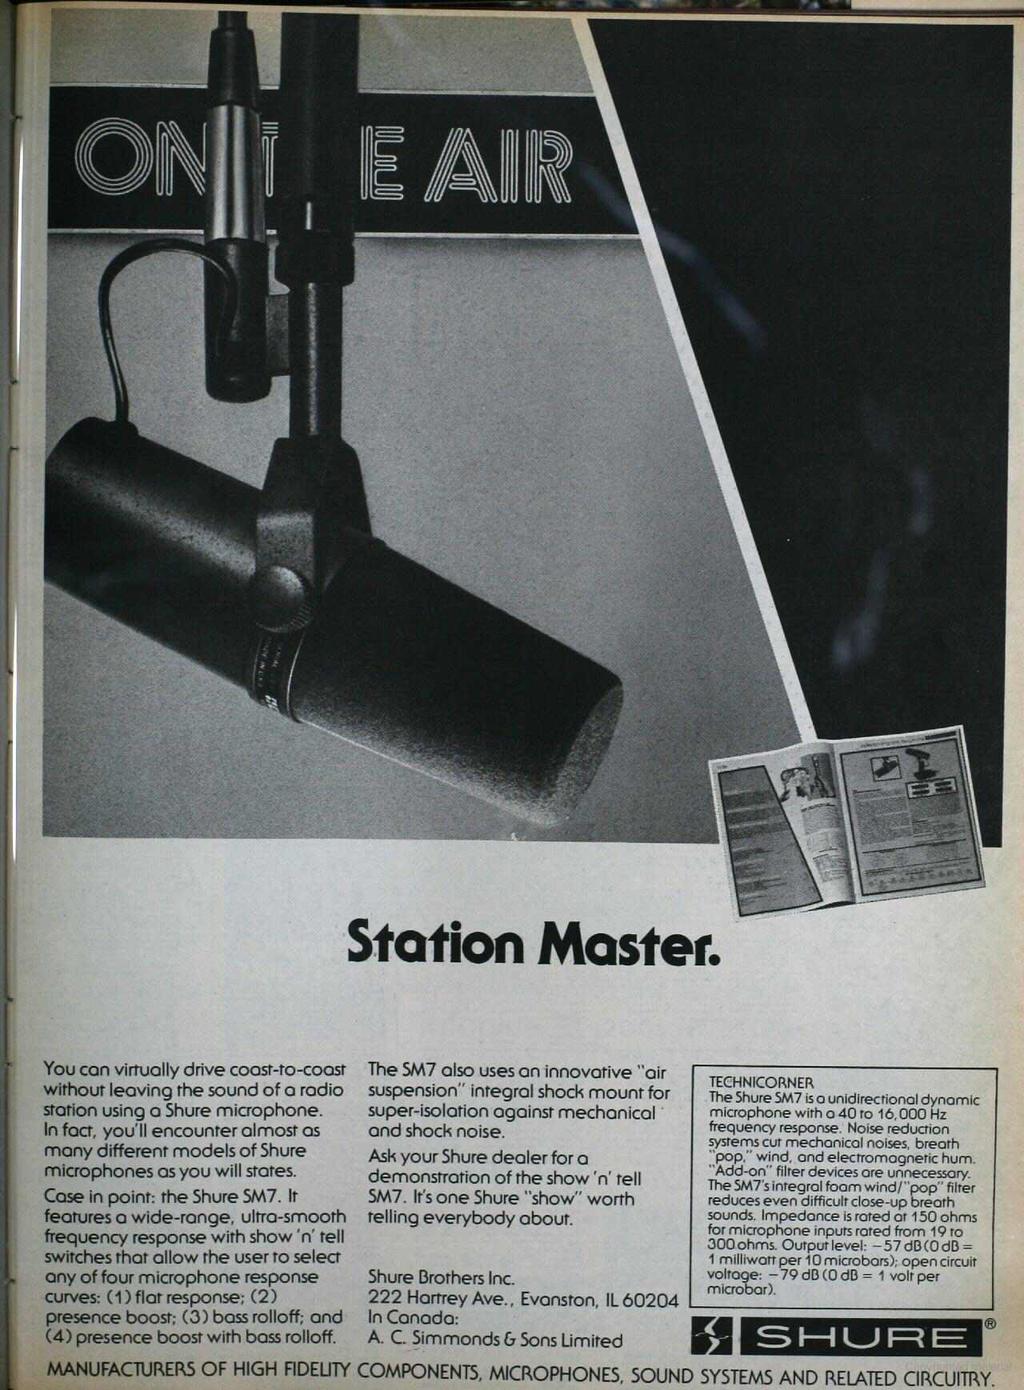 MANUFACTURERS OF HIGH FIDELITY COMPONENTS, MICROPHONES, SOUND SYSTEMS AND RELATED CIRCUITRY. www.americanradiohistory.com Station Master.